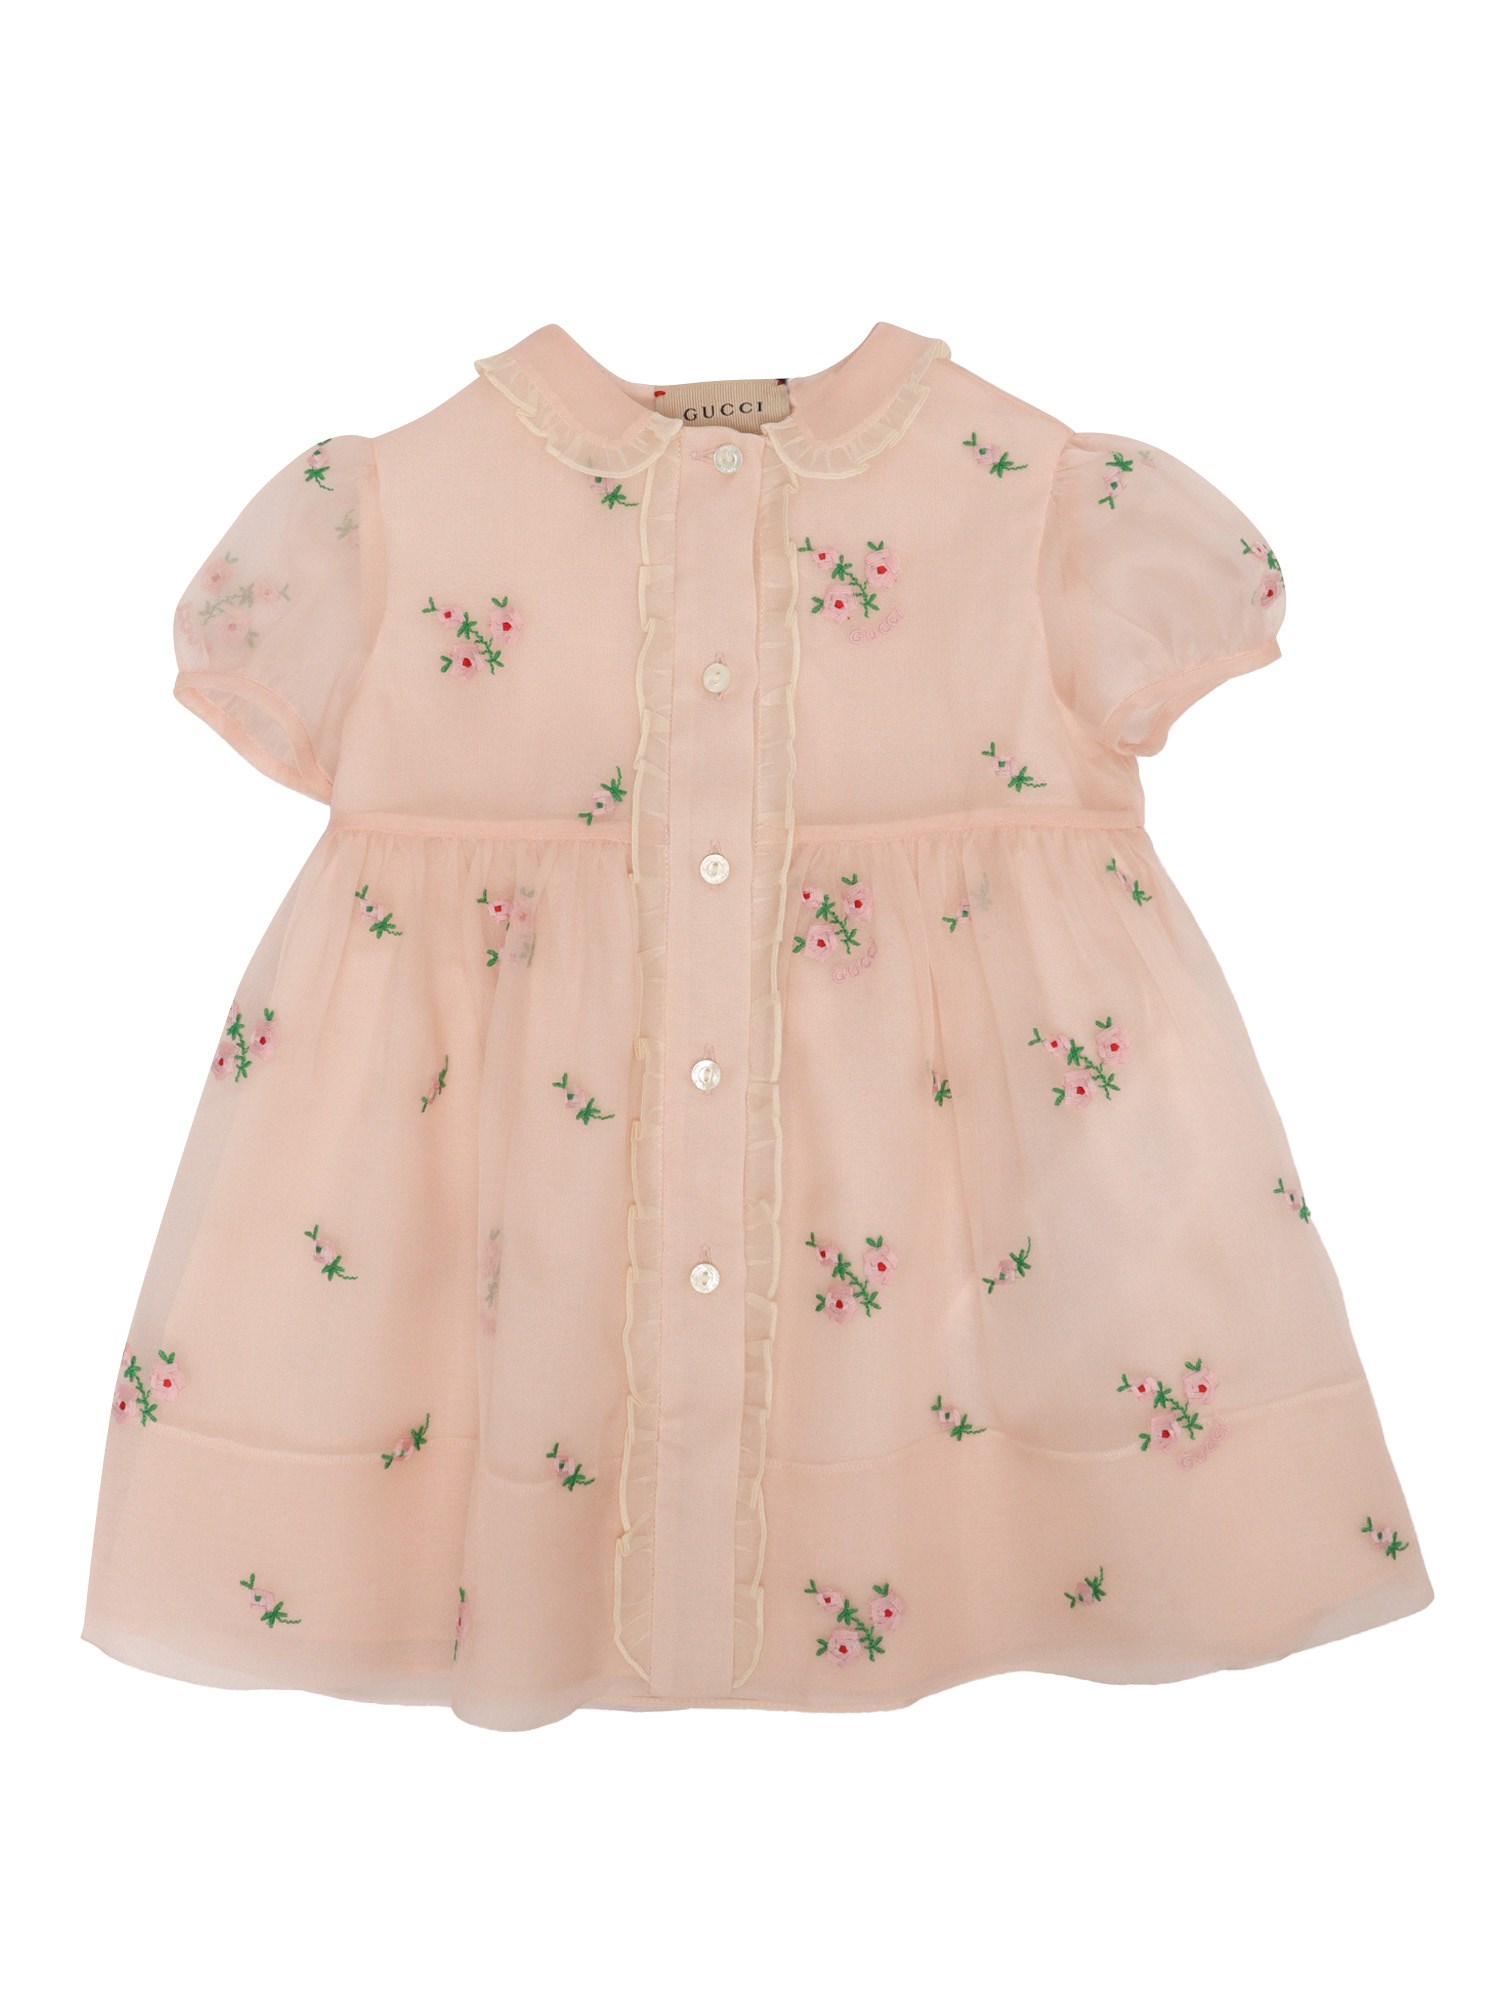 Gucci Pink Gg Dress With Flowers